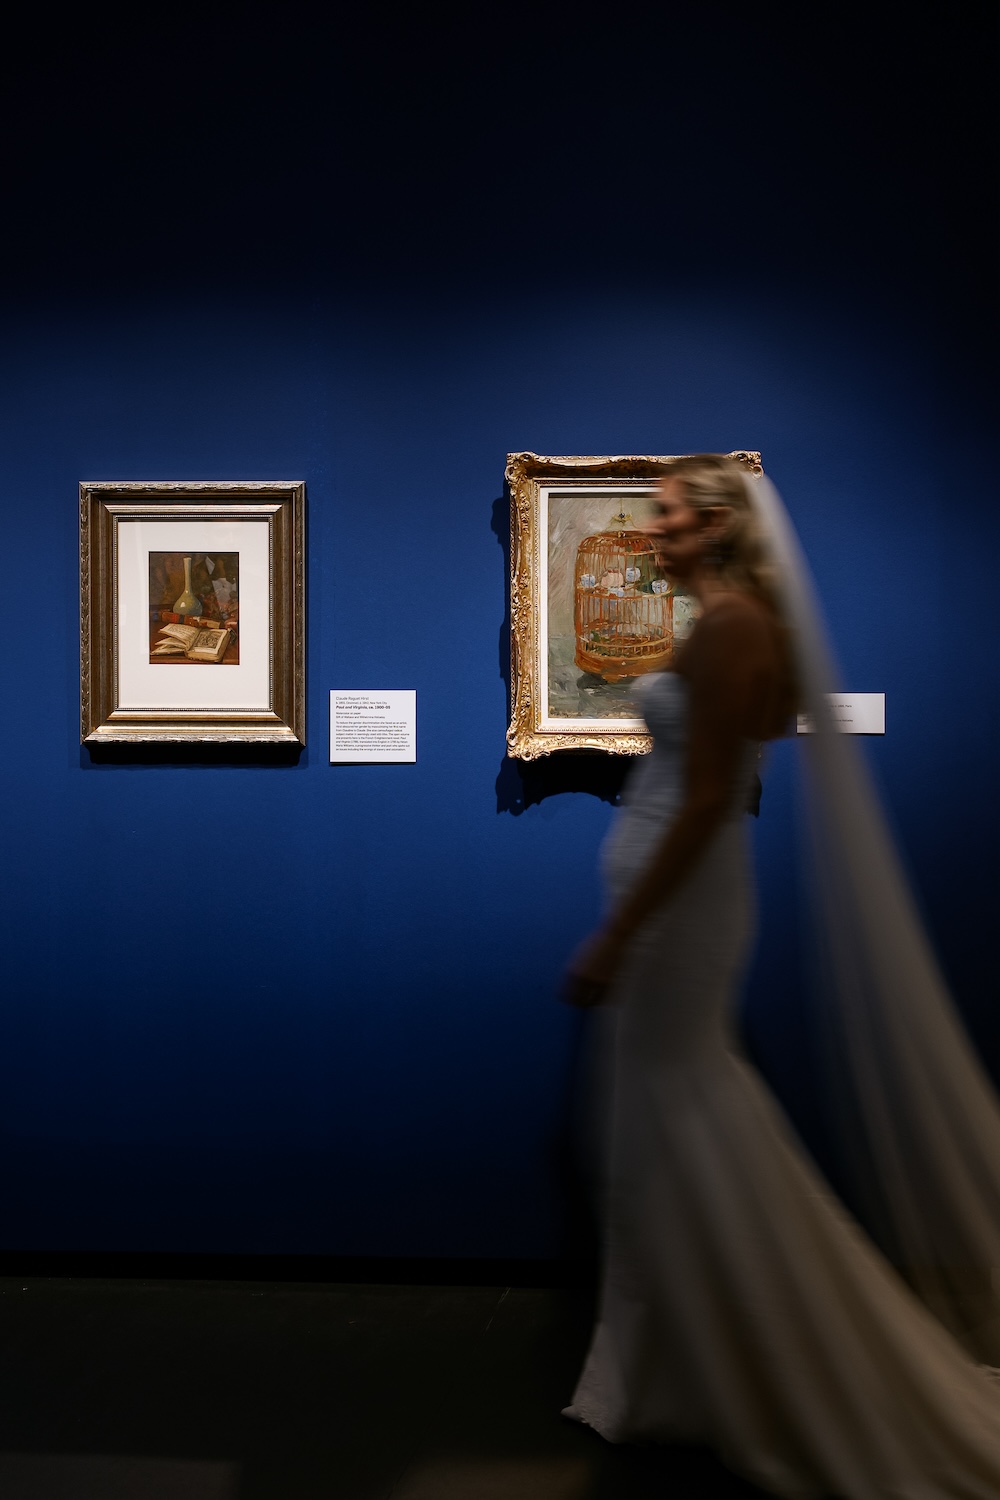 In motion photograph, bride walks past hanging artwork in museum. Modern Washington DC wedding at National Museum of Women in the Arts. Sarah Bradshaw Photography.